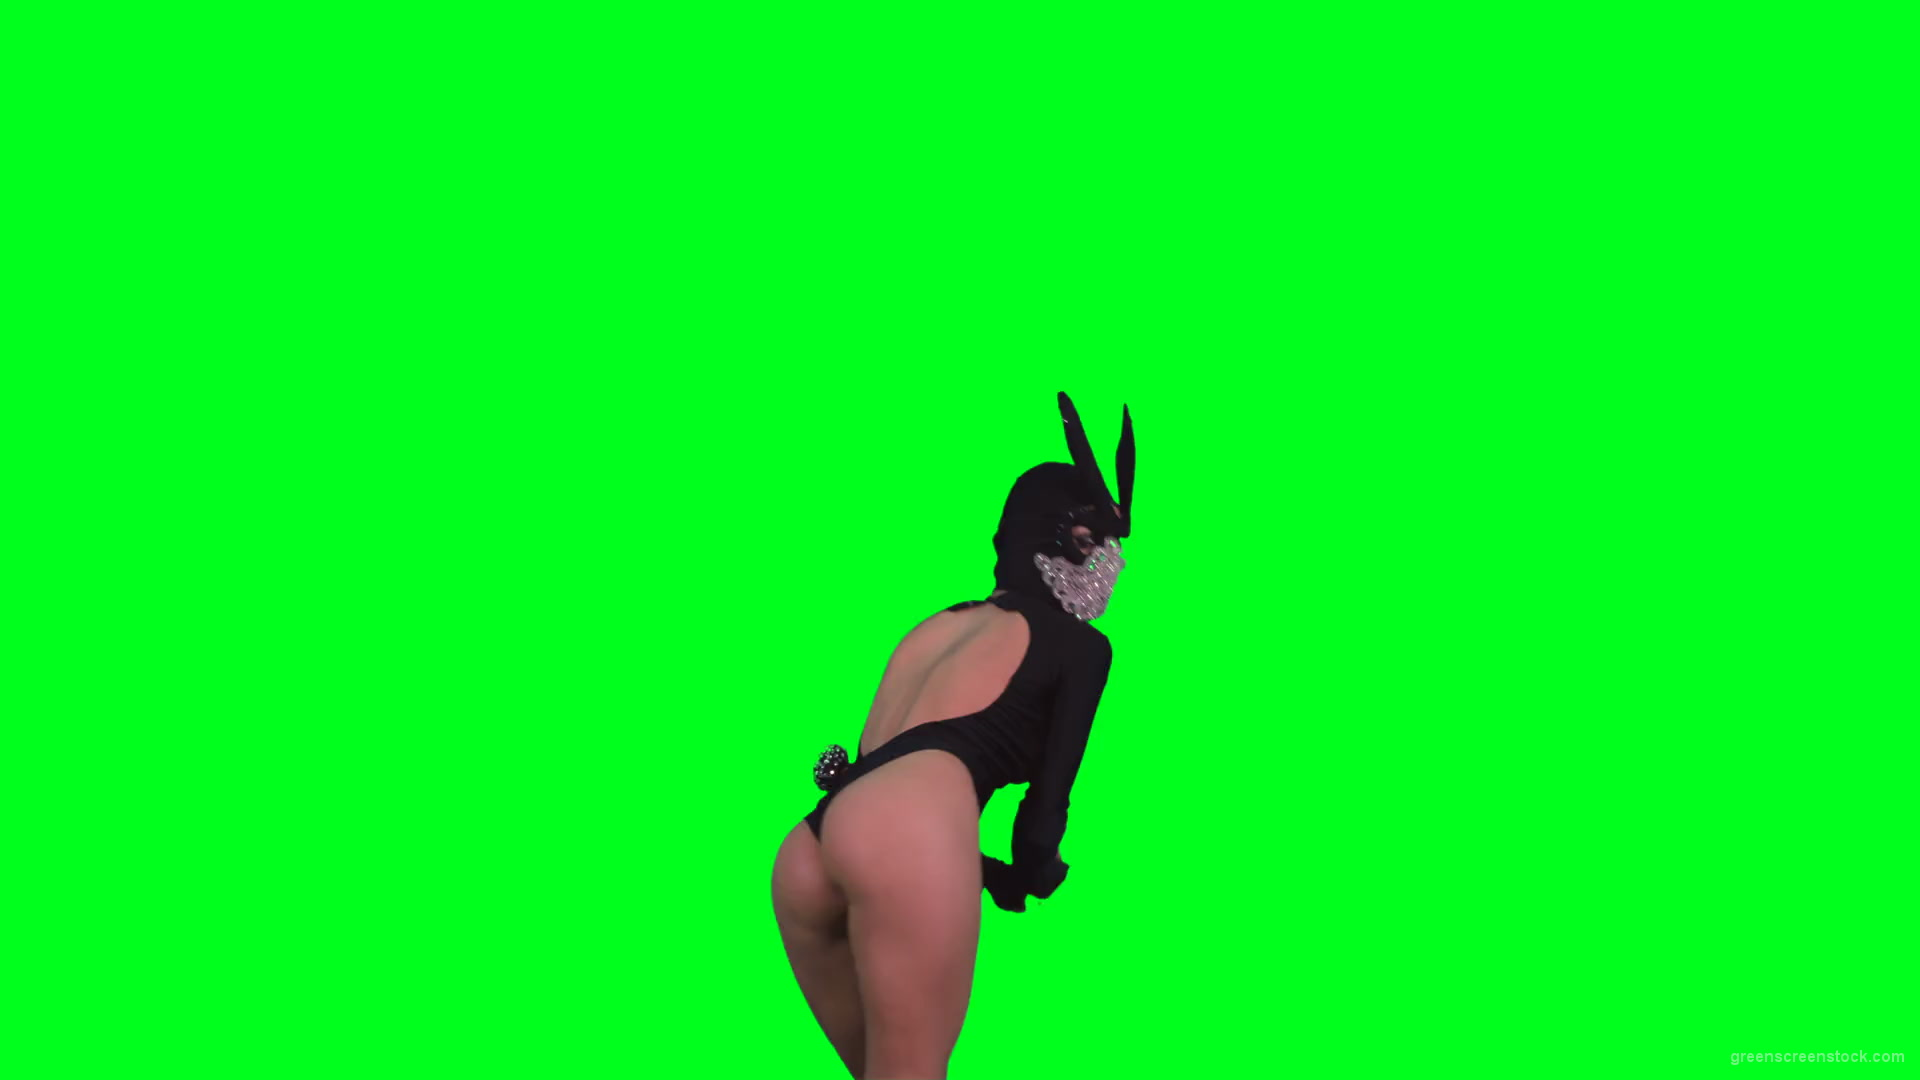 Sexy-Bunny-Girl-in-Rabbit-black-mask-chilling-with-animal-instict-isolated-on-green-screen-4K-Video-Footage-1920_001 Green Screen Stock